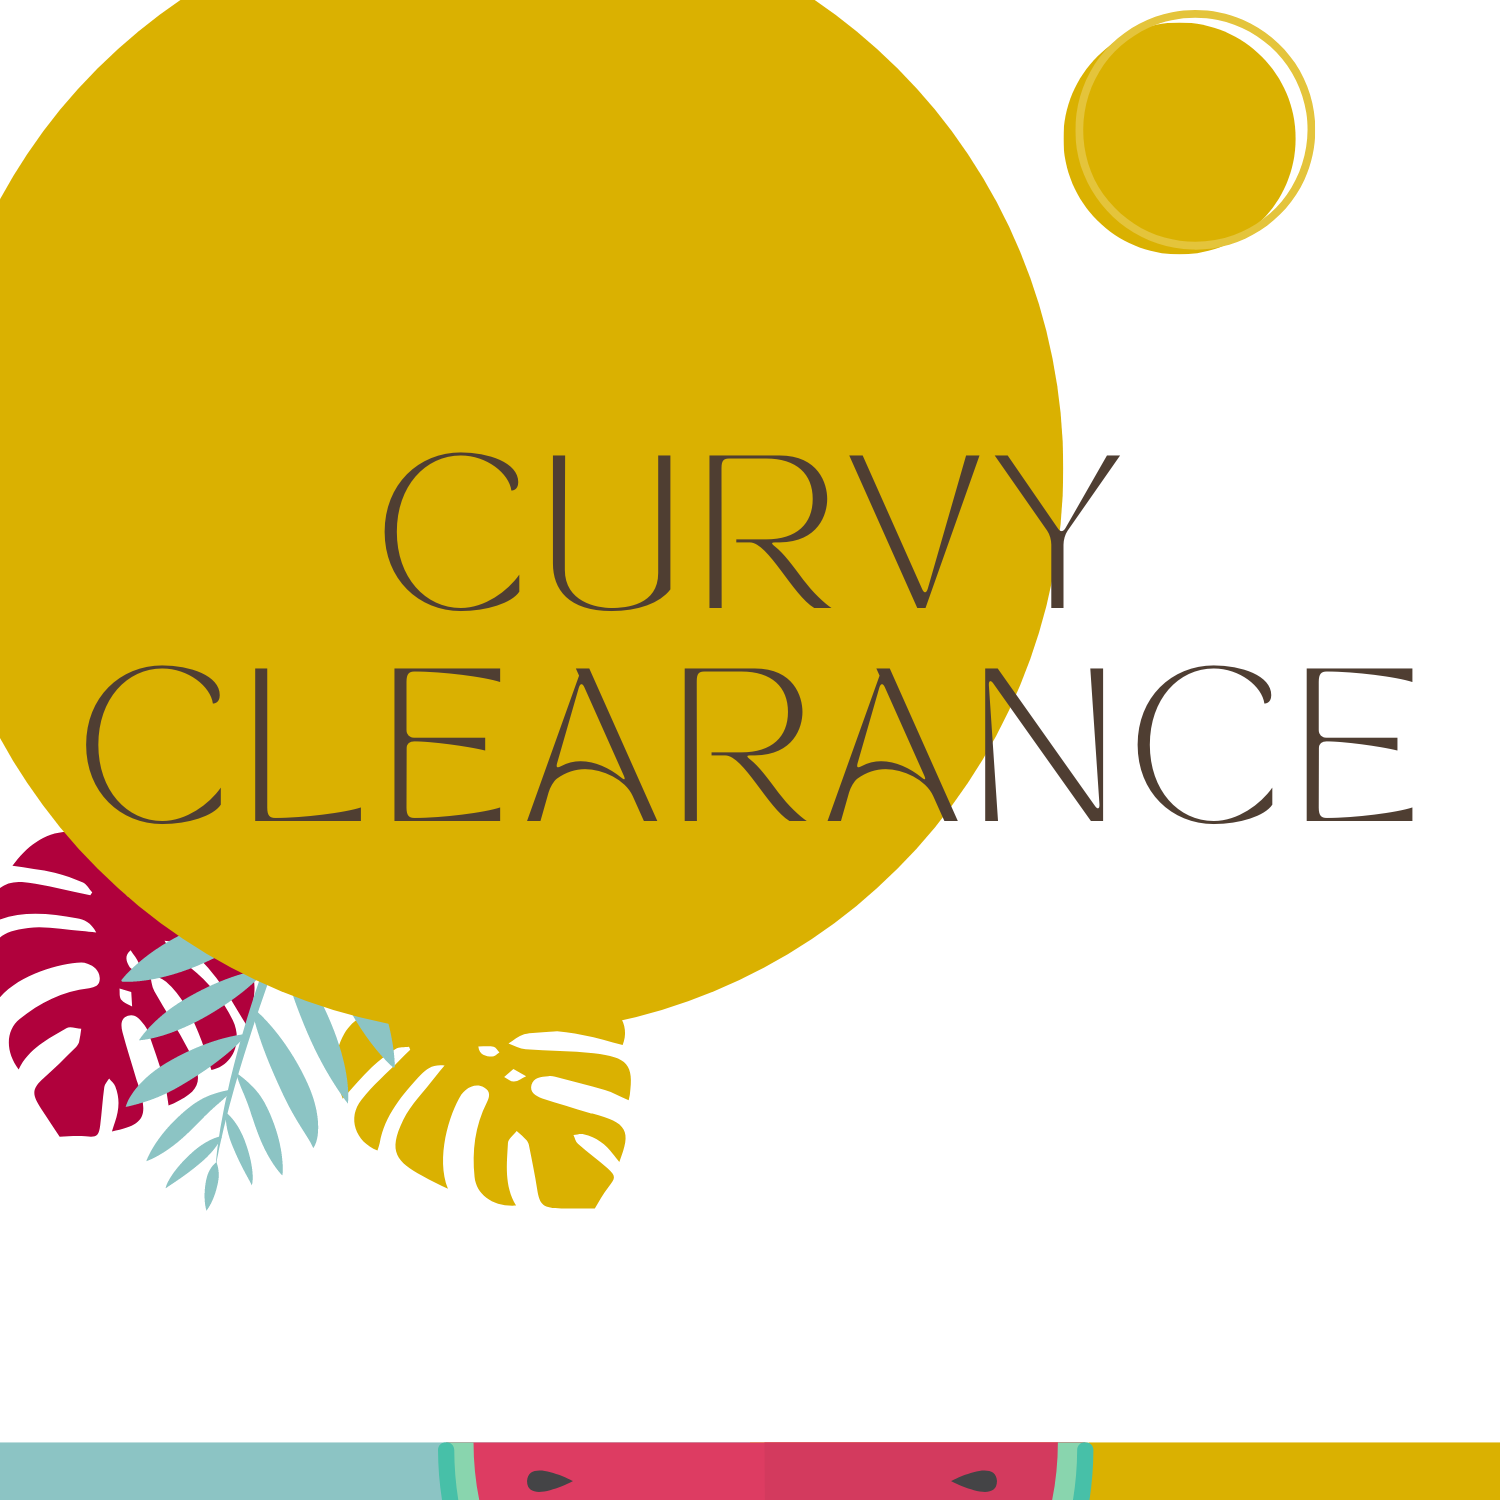 Shop Our Curvy Clearance Collection with Hometown Style | A women's fashion boutique located in Ingersoll, Ontario